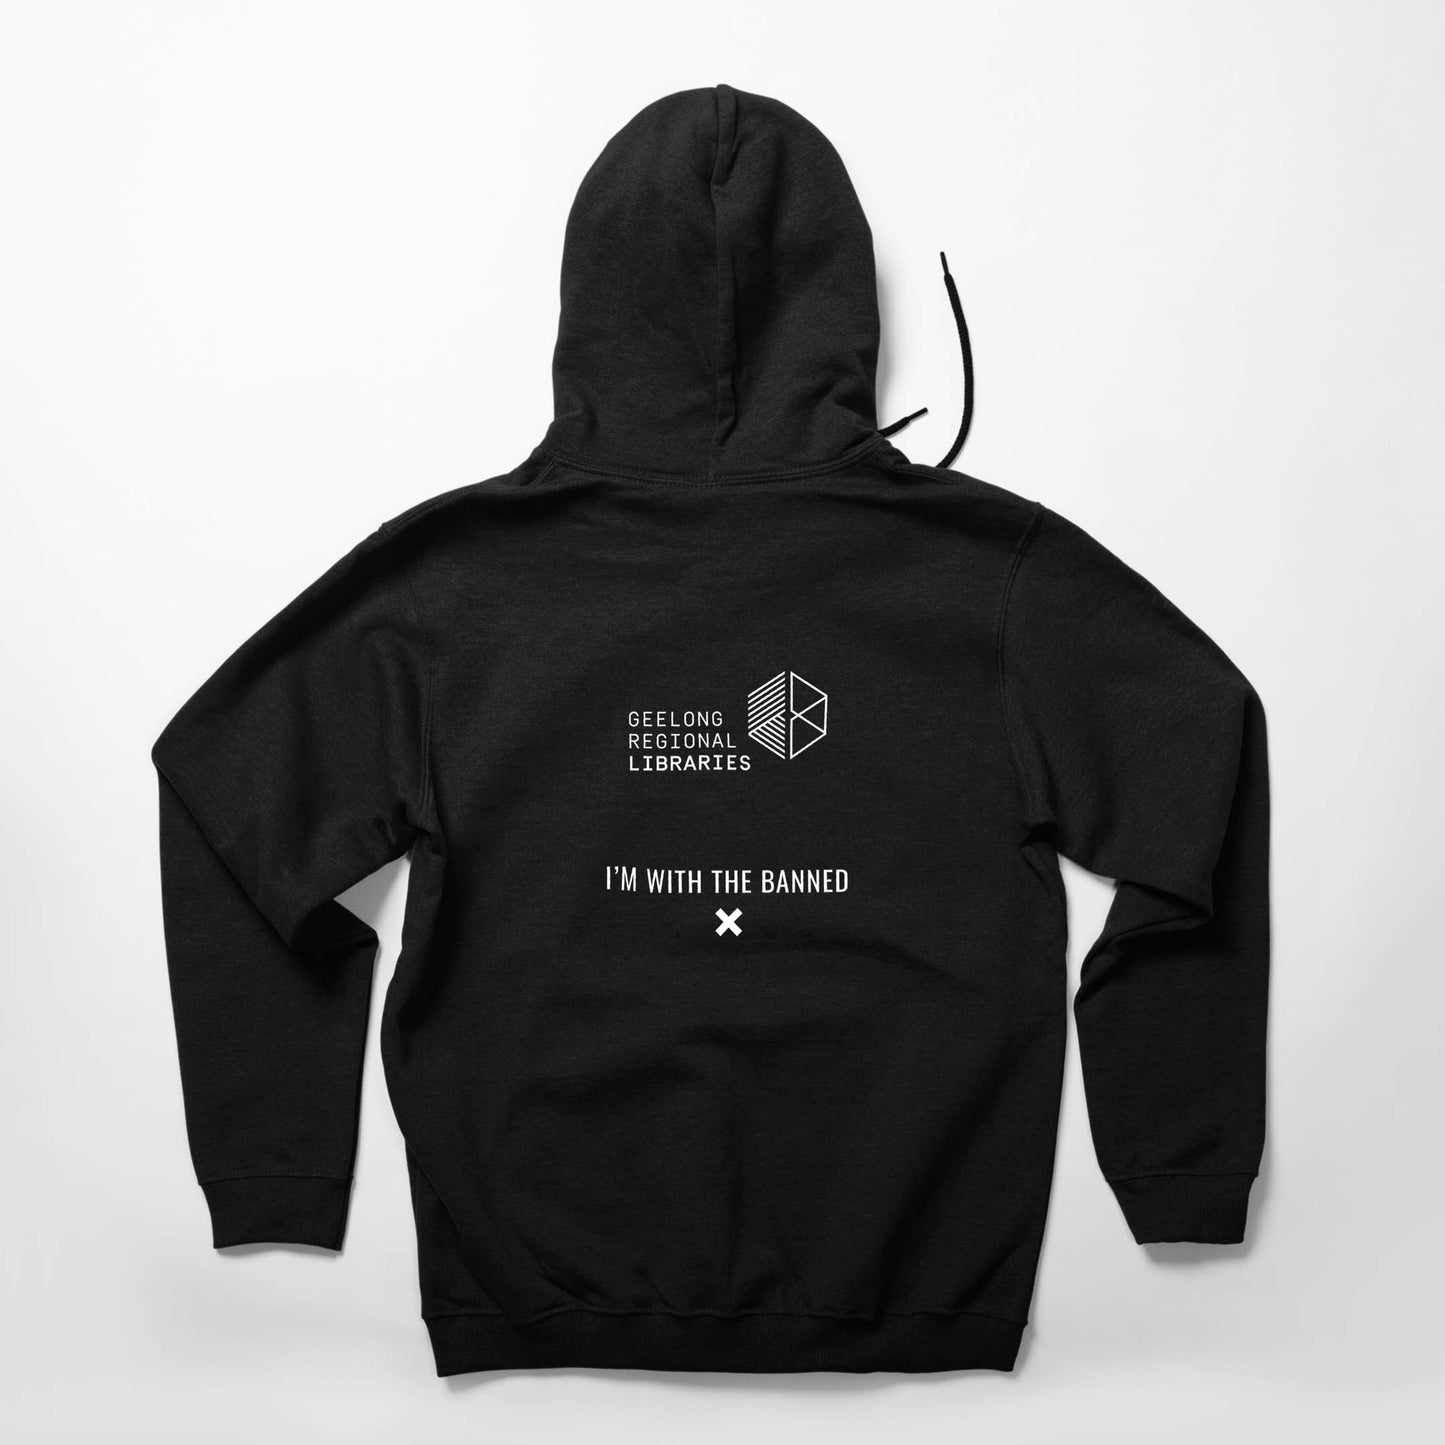 I'm with the Banned Fleece Hoodie – Men's (more colours available)